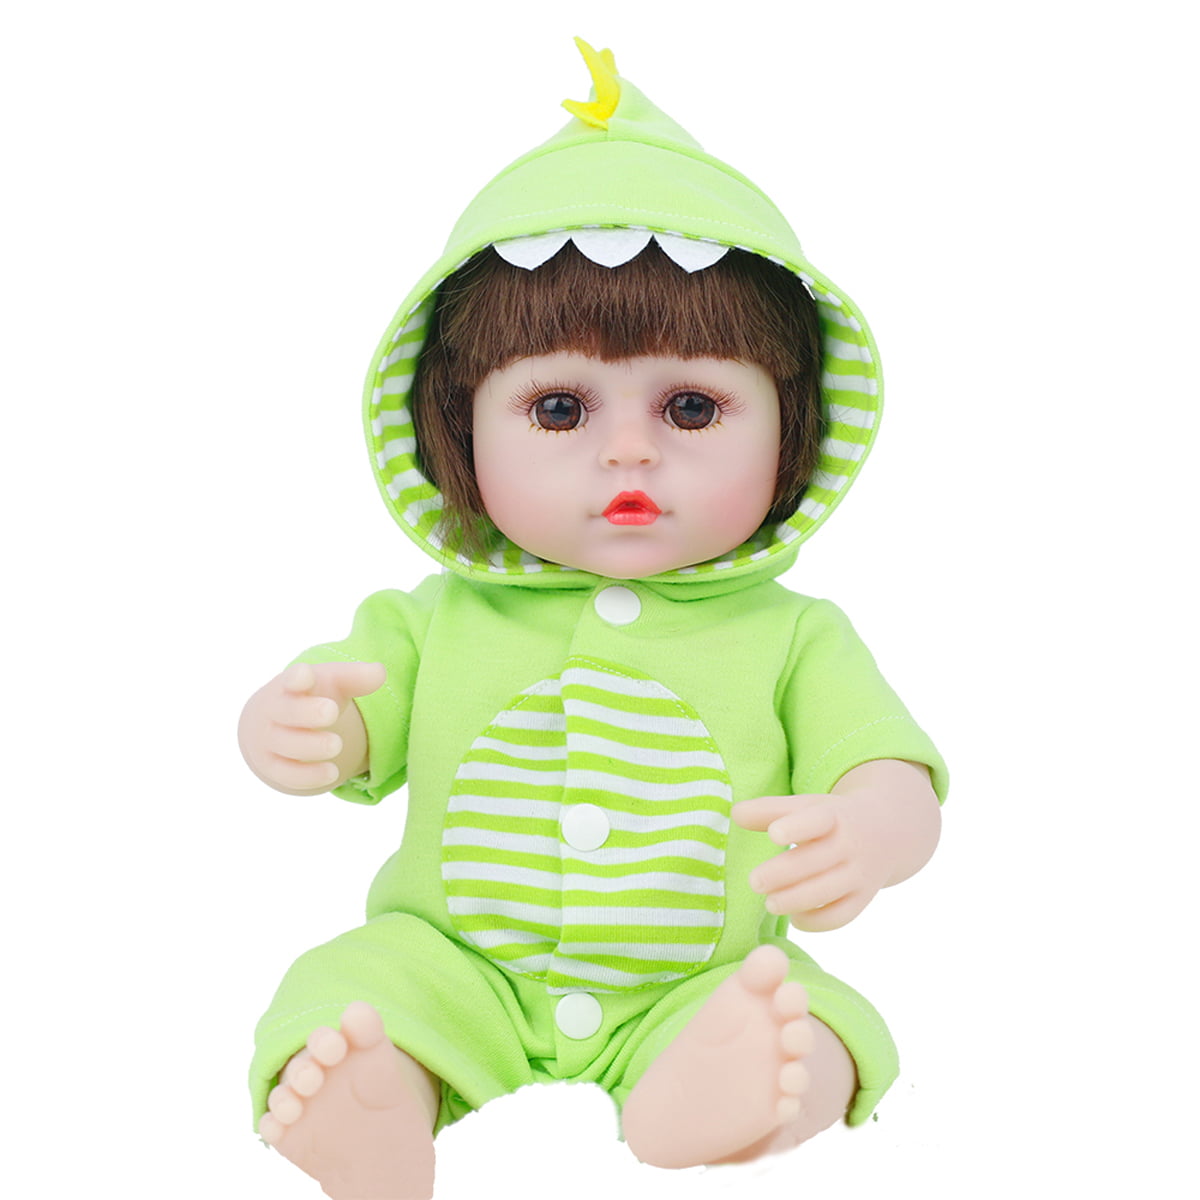 Details about   12'' High Quality Silicone Reborn Baby BOY Doll Baby+Clothes Kids Playmate Toys 